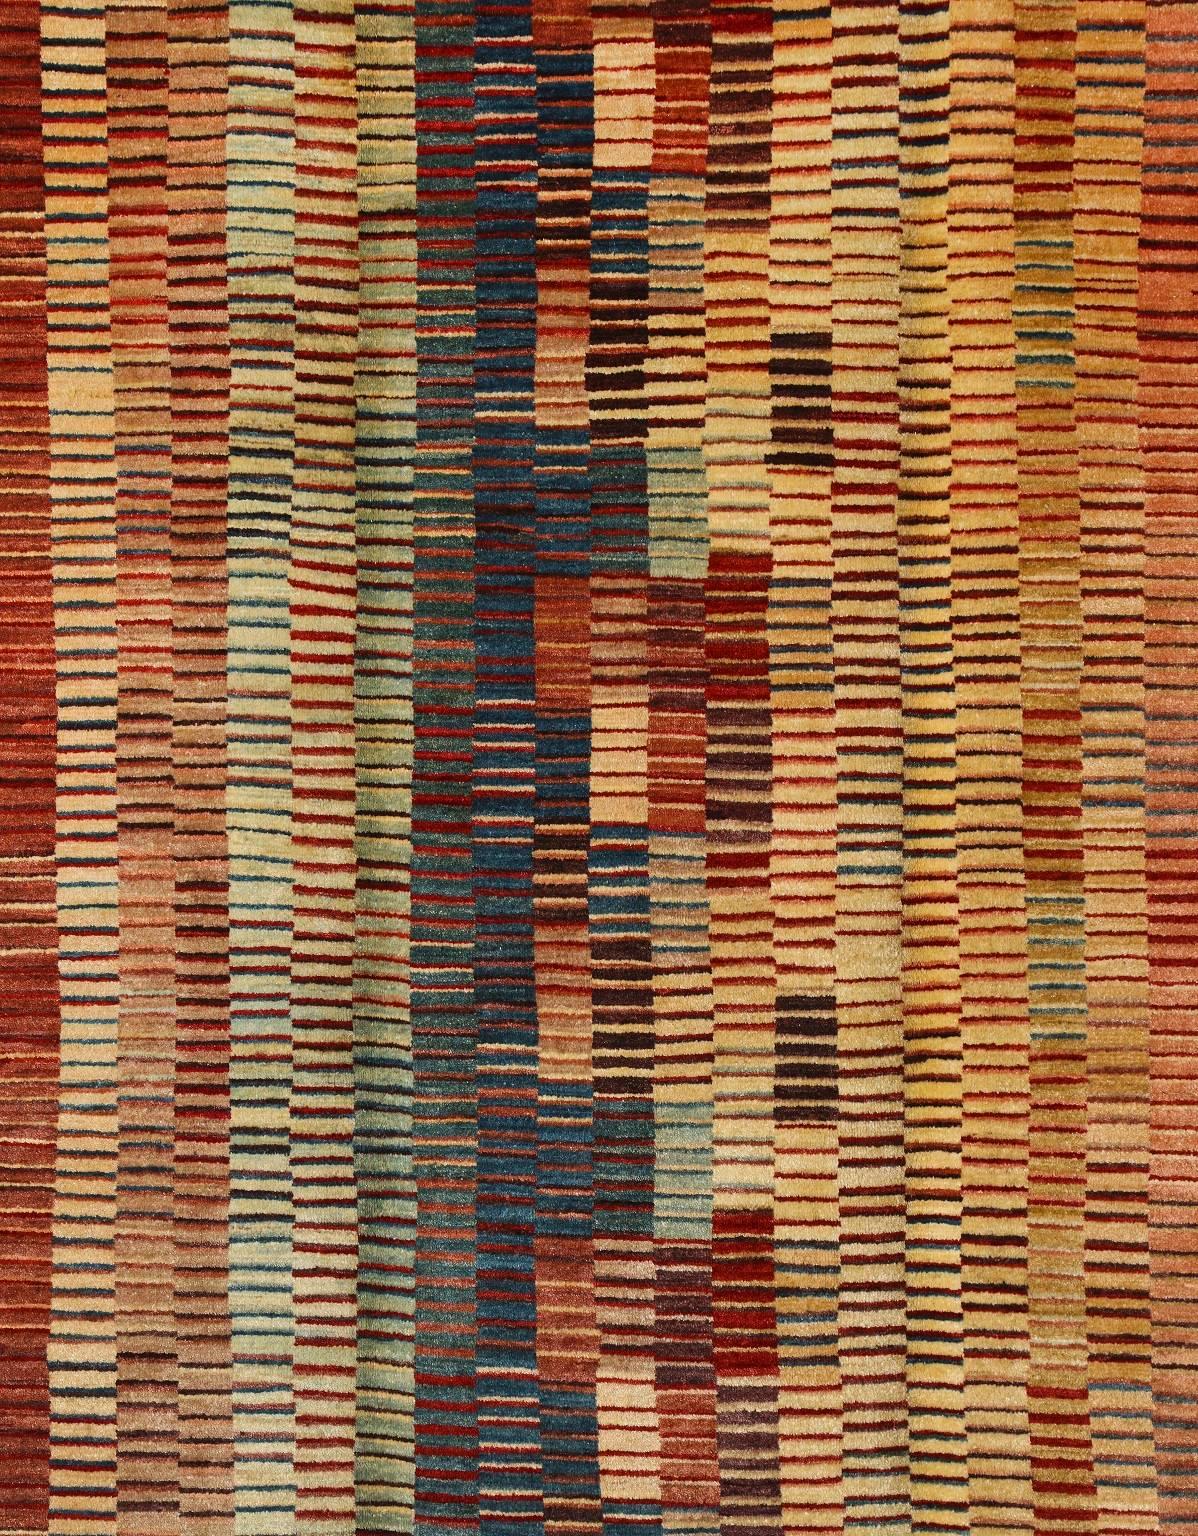 This Orley Shabahang signature carpet in handspun wool and organic vegetable dyes was completed using Orley Shabahang's signature Meyghan weaving technique, and the wool is also of Orley Shabahang signature, derived from our own heard of Persian